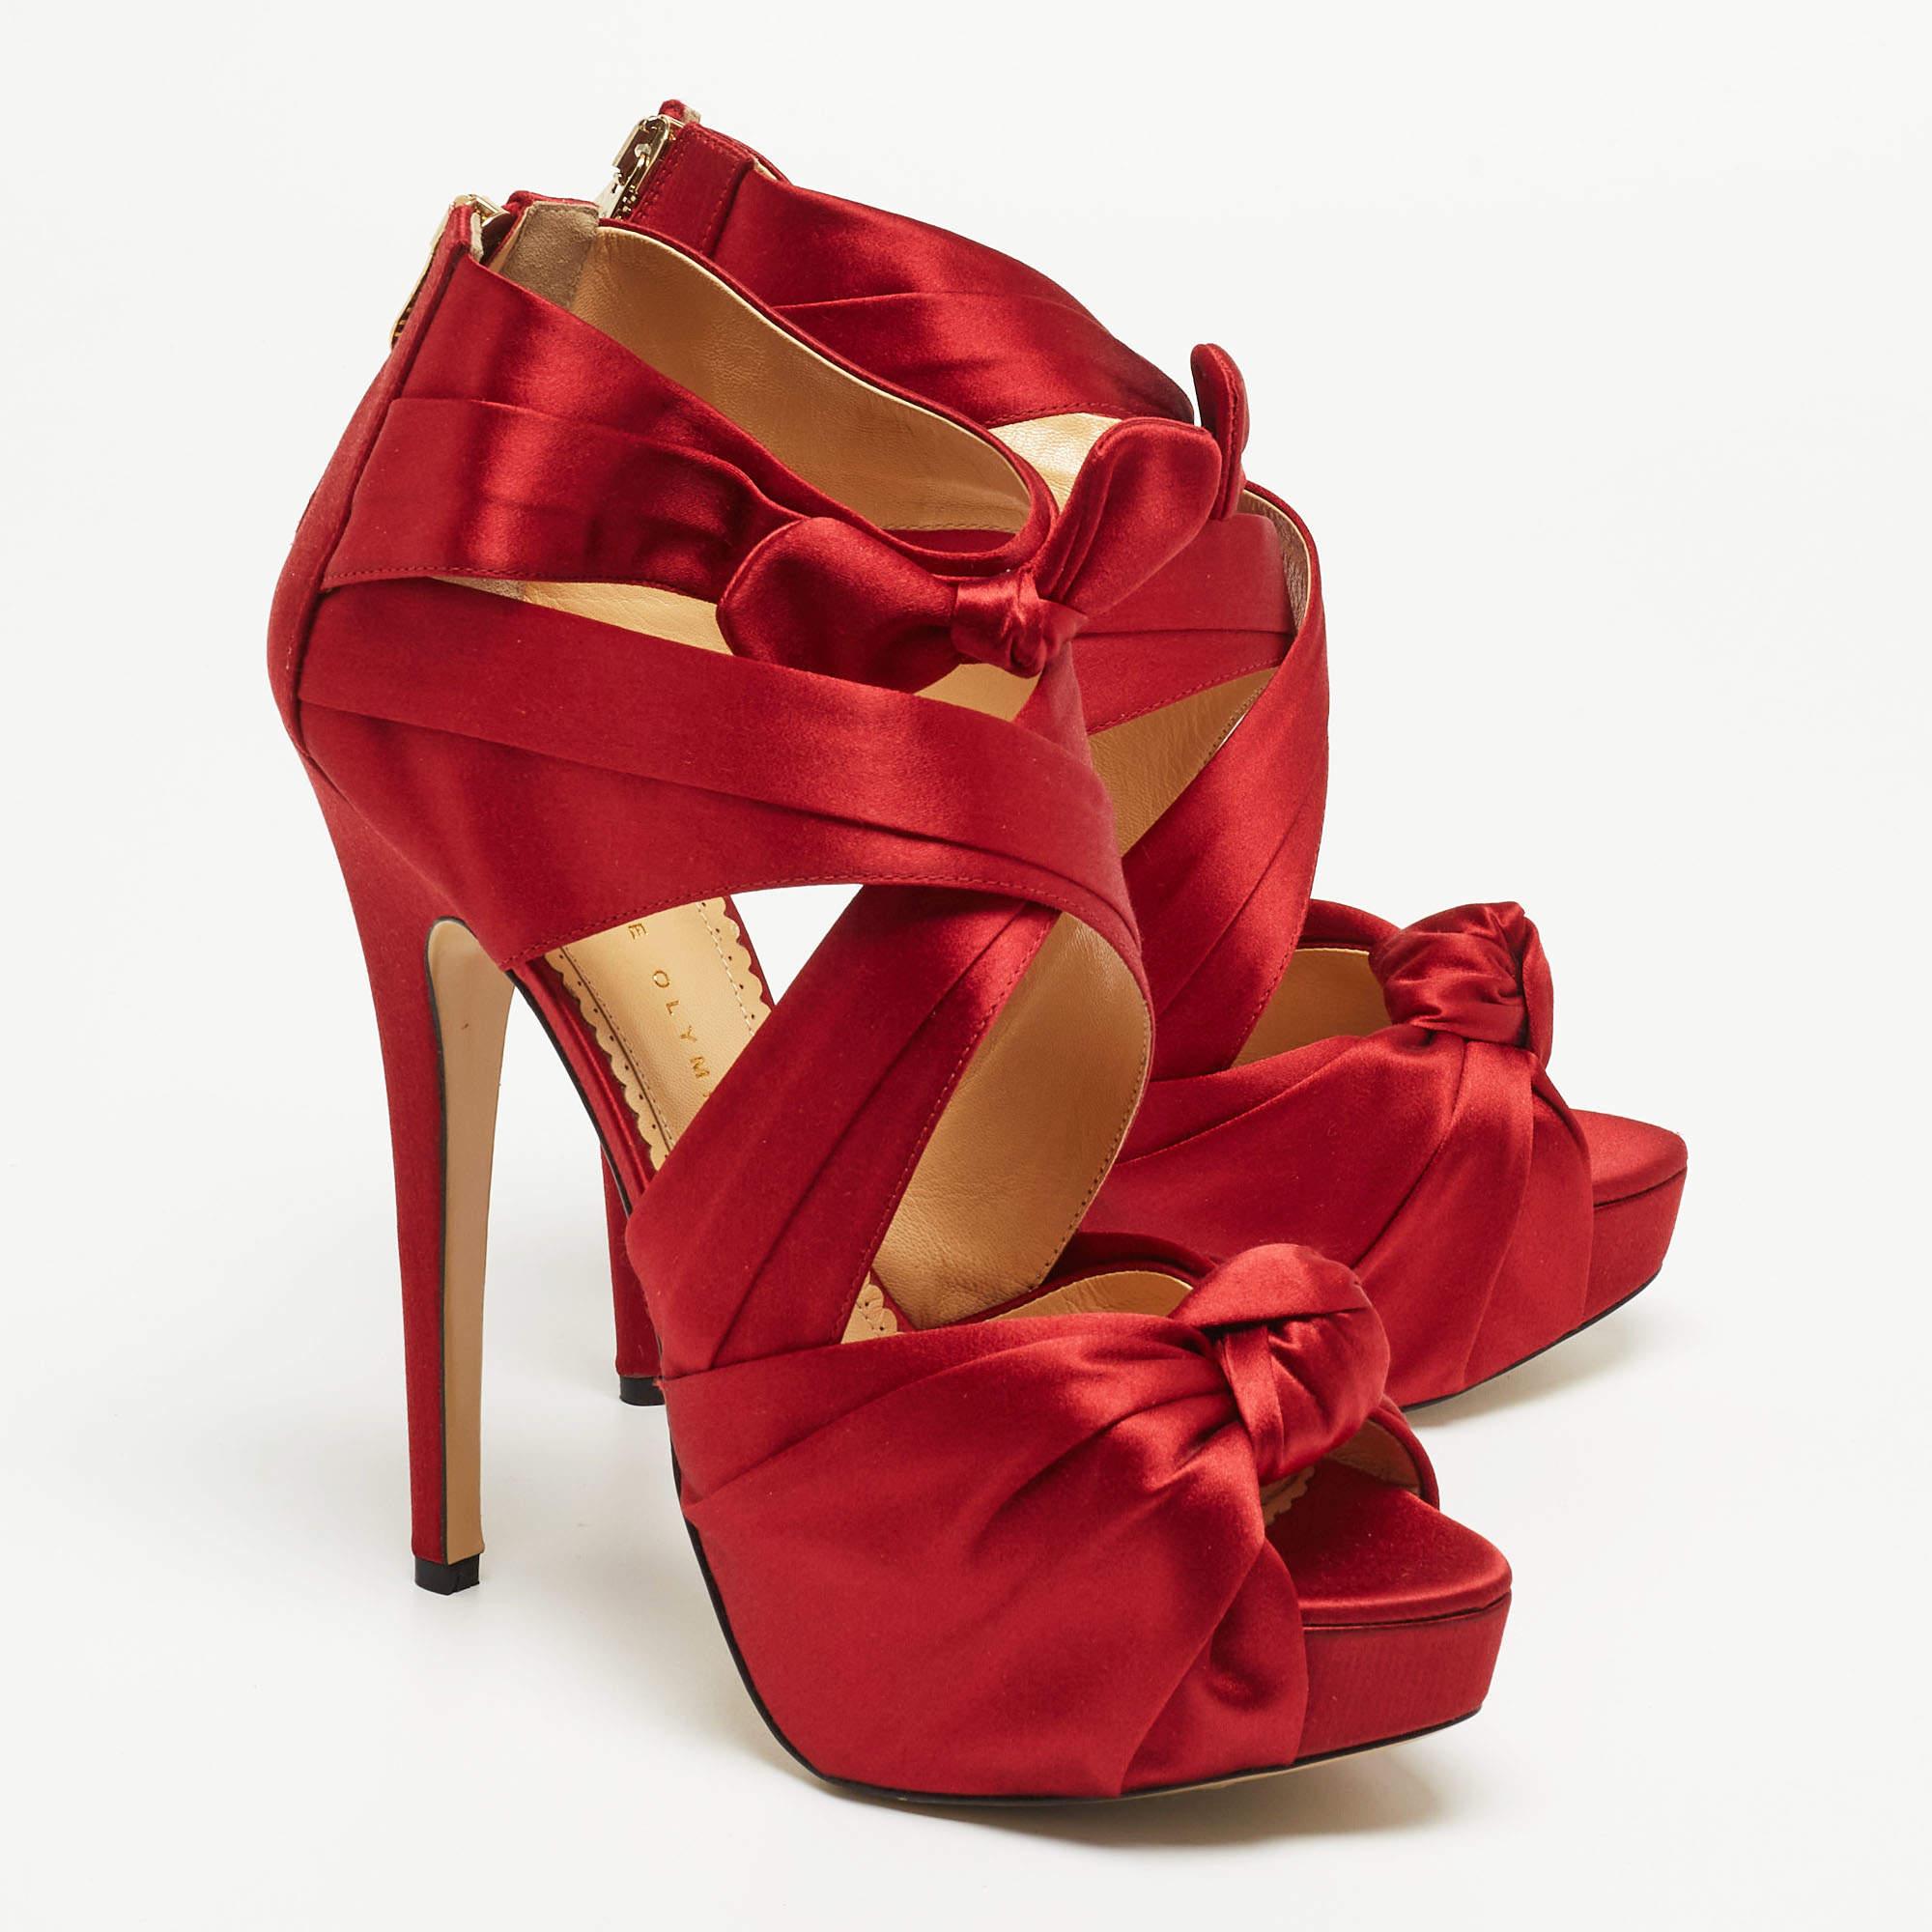 Women's Charlotte Olympia Red Satin Andrea Knotted Platform Sandals Size 41